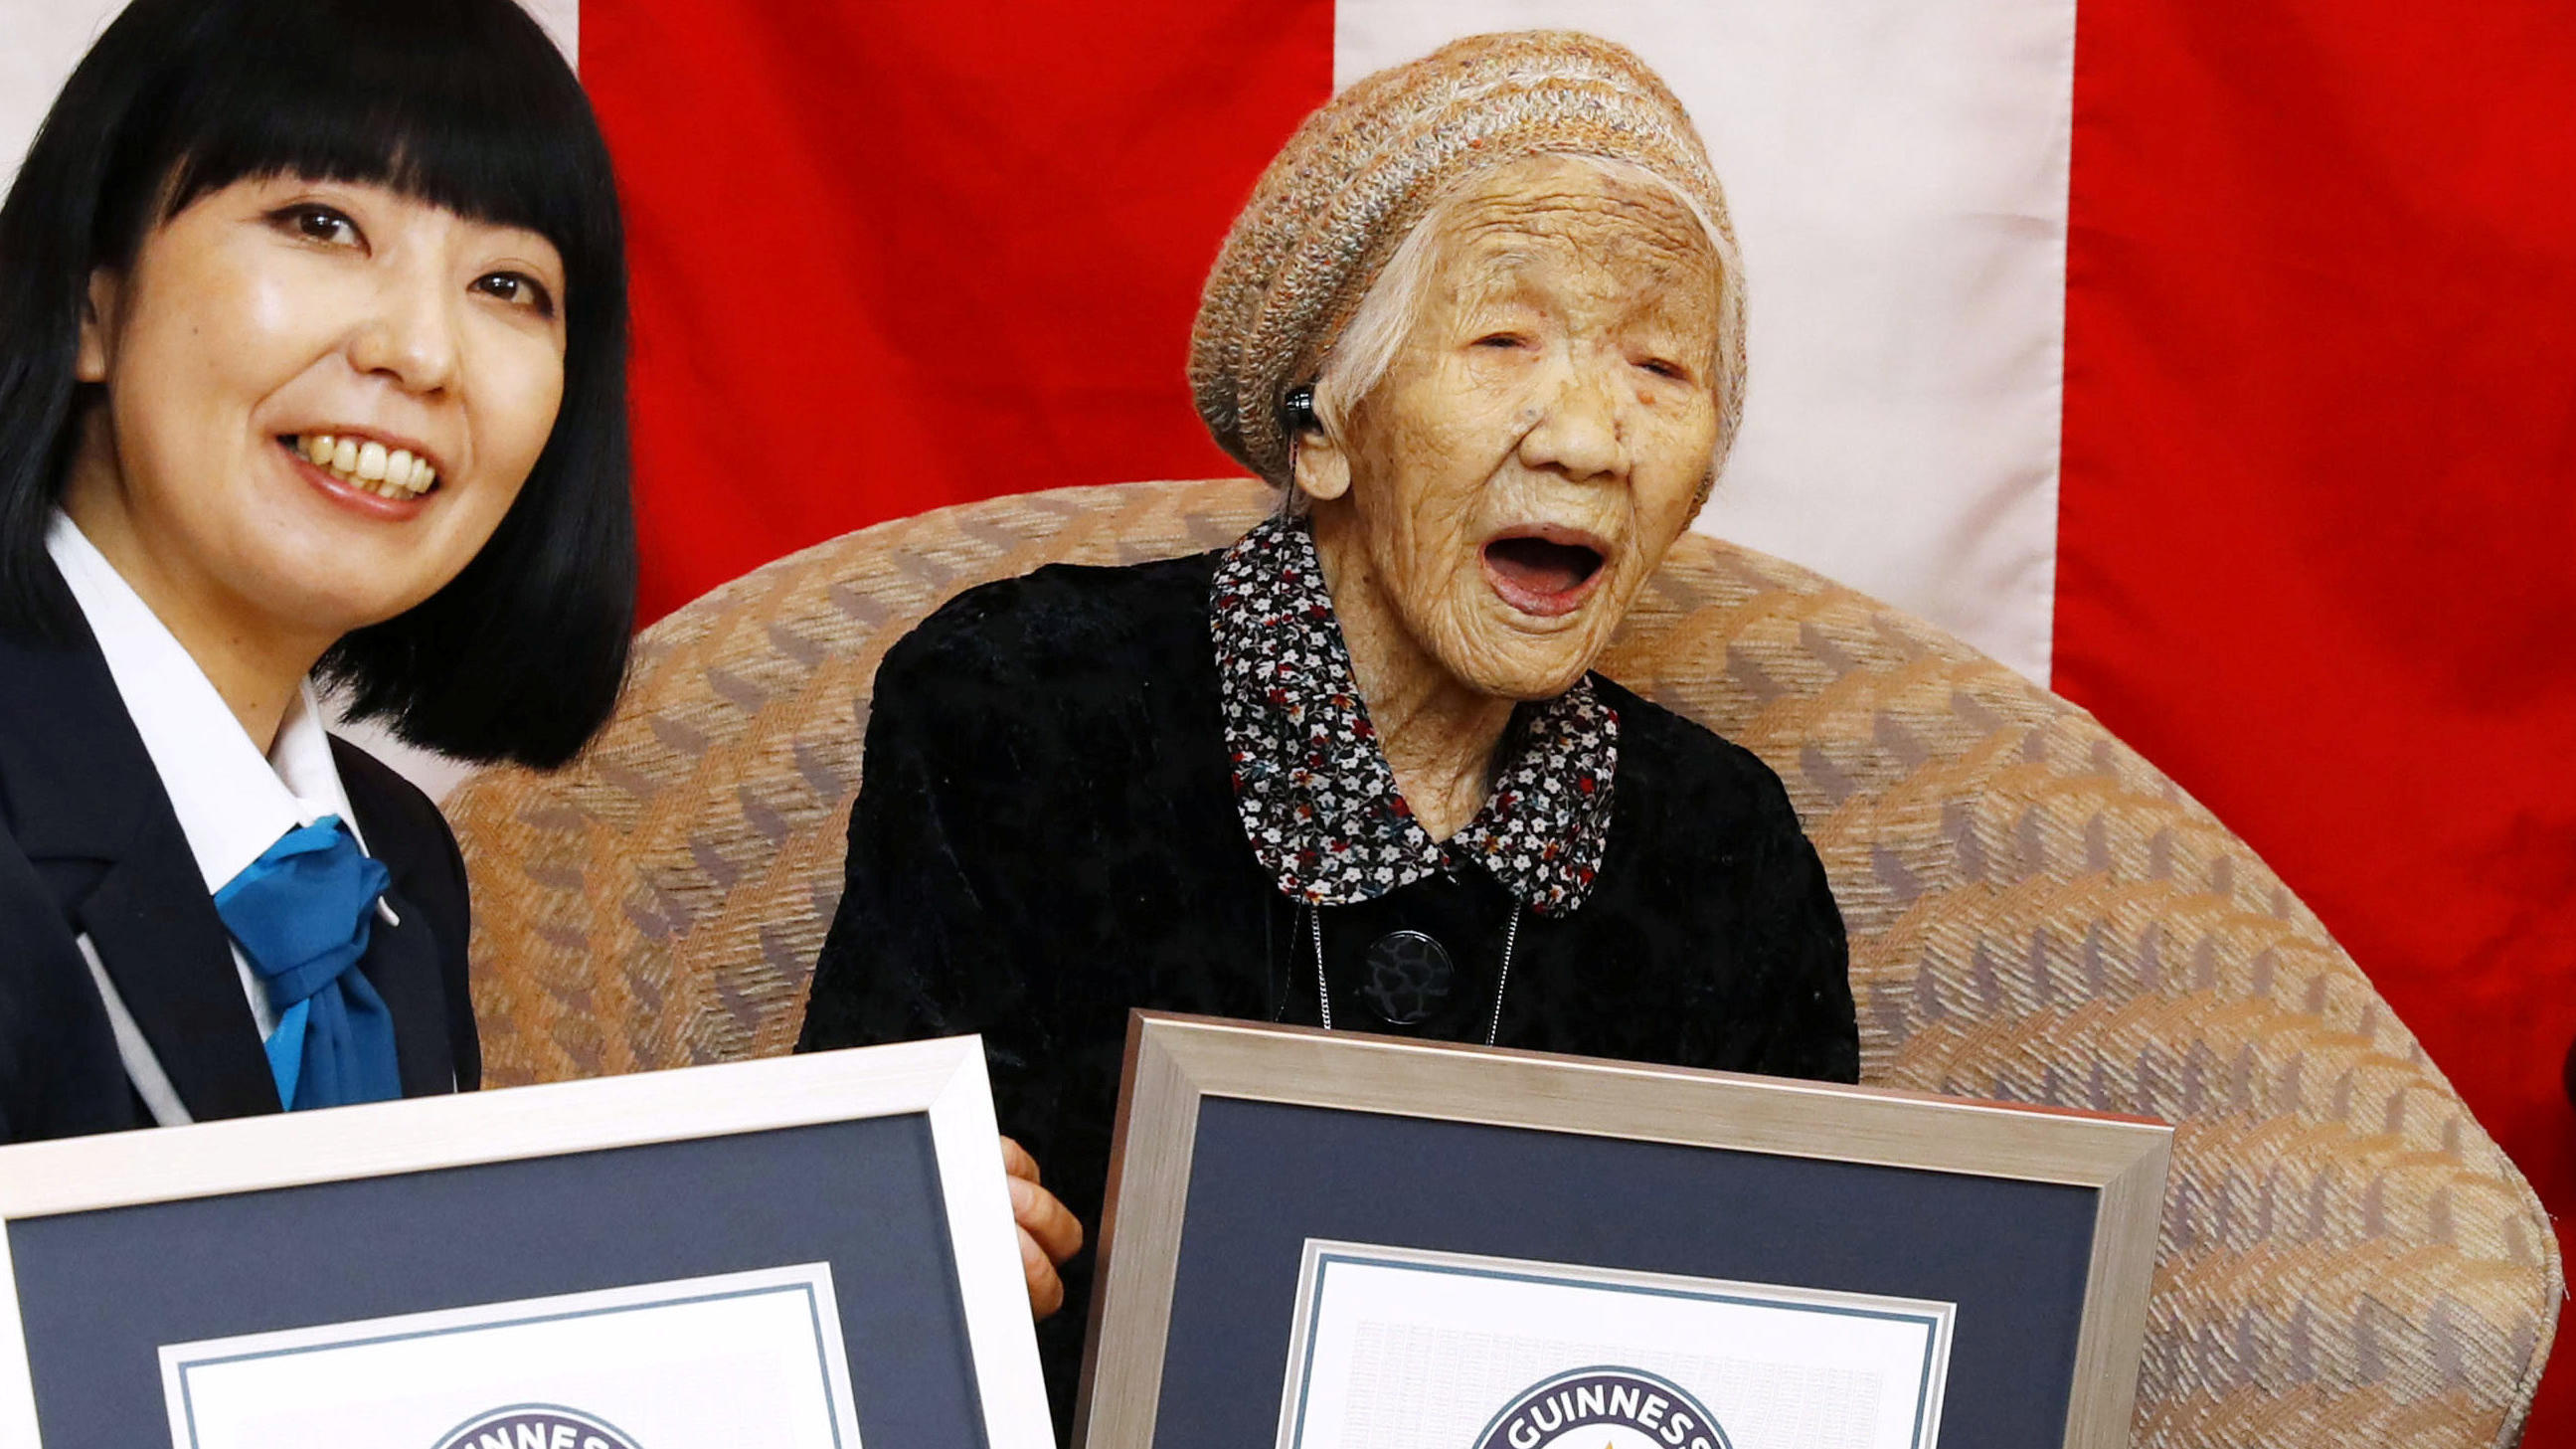 116-year-old Japanese woman Kane Tanaka celebrates during a ceremony to recognise her as the world's oldest person living and world's oldest woman living by the Guinness World Records in Fukuoka, Japan March 9, 2019.  Mandatory credit Kyodo/via REUTE